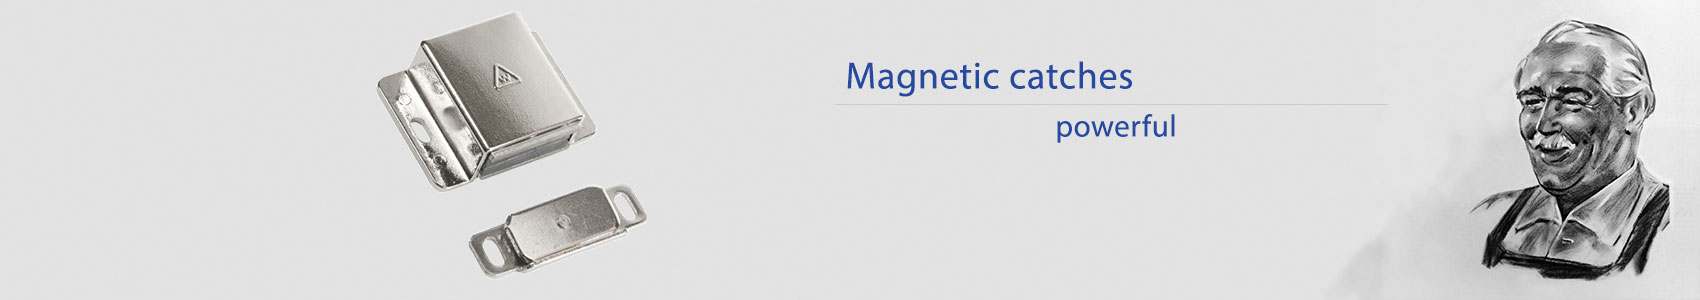 Magnetic catches